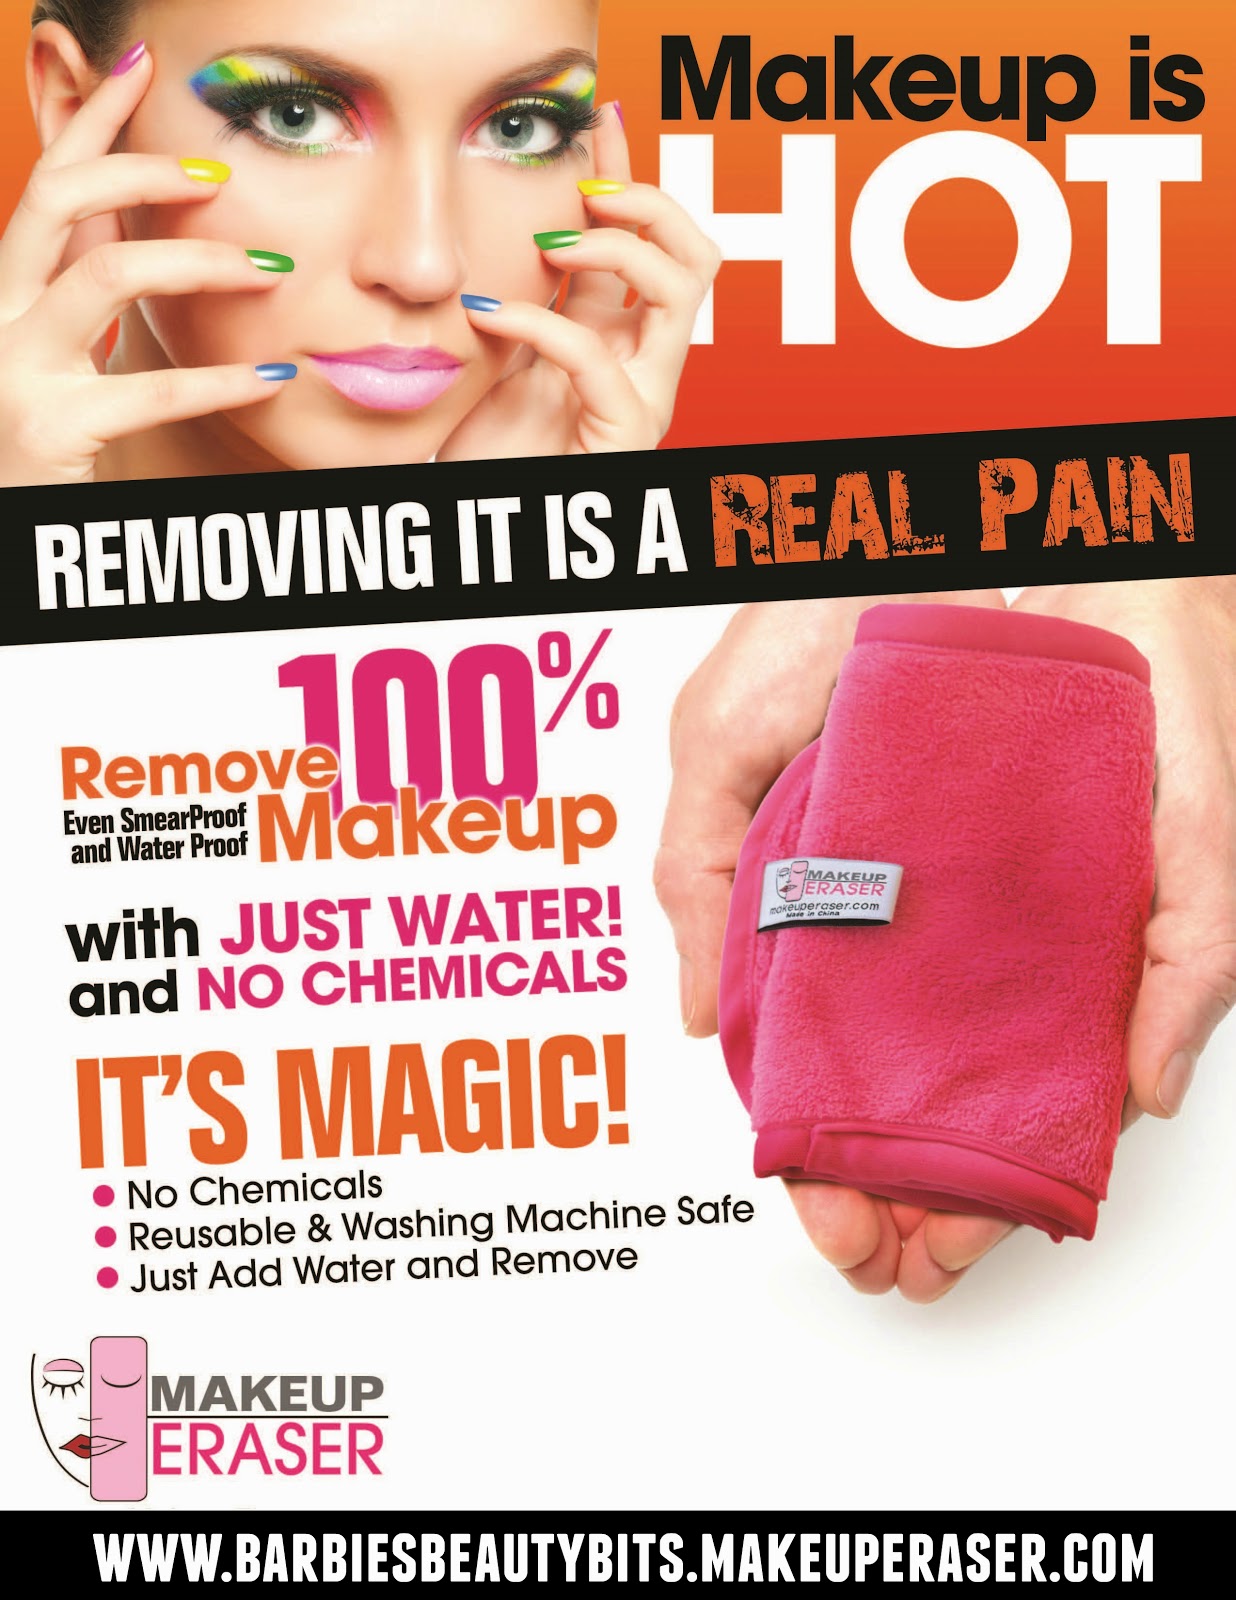 The Easiest & Cheapest Way To Remove Your Makeup...PERIOD. With the makeup eraser by barbies beauty bits